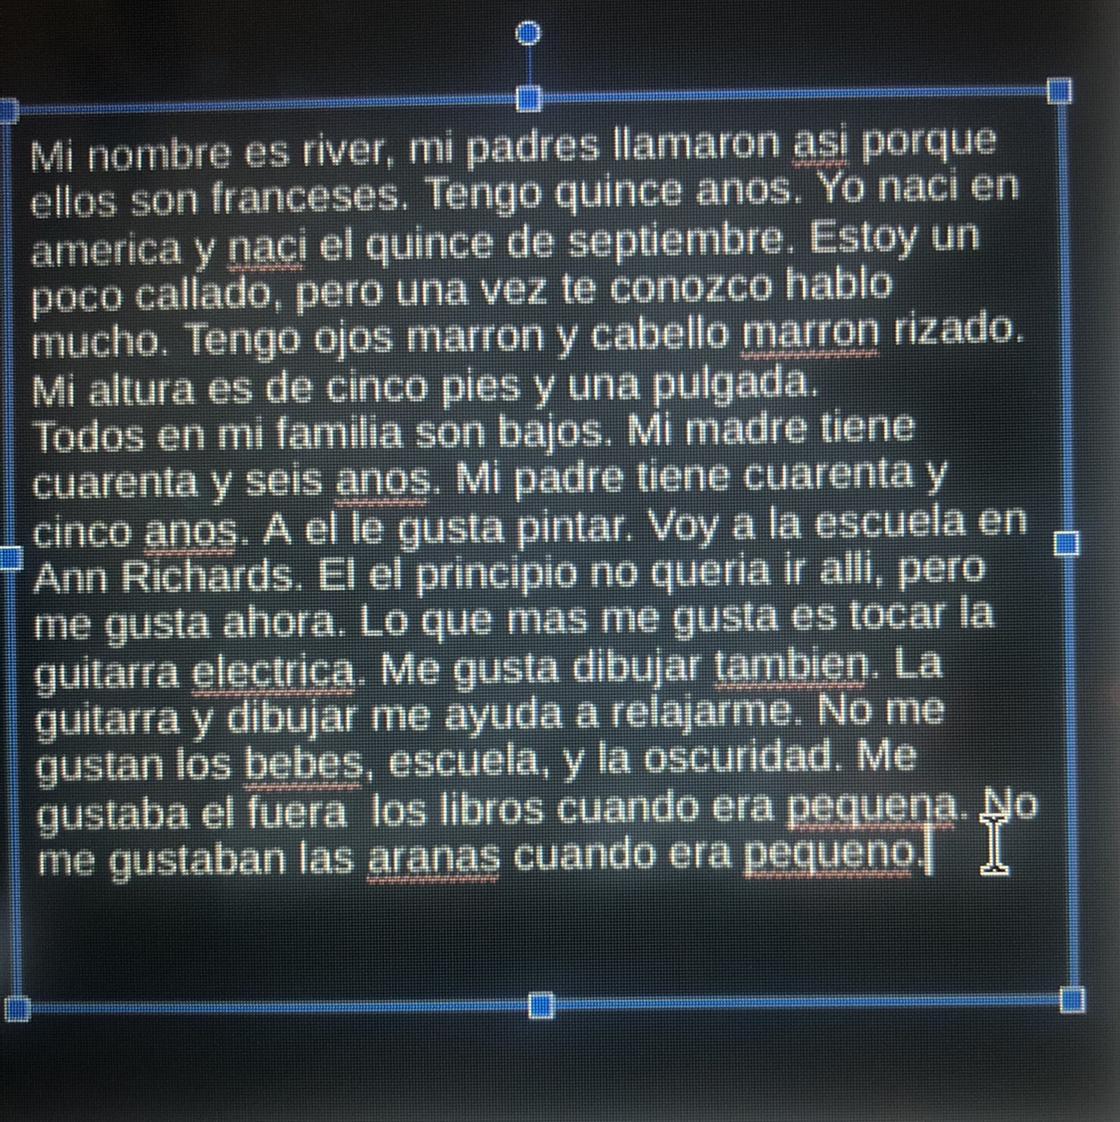 Is This Correct Spanish? Im Kind Of New At It And I Just Need Someone To Check Over It To Make Sure Its